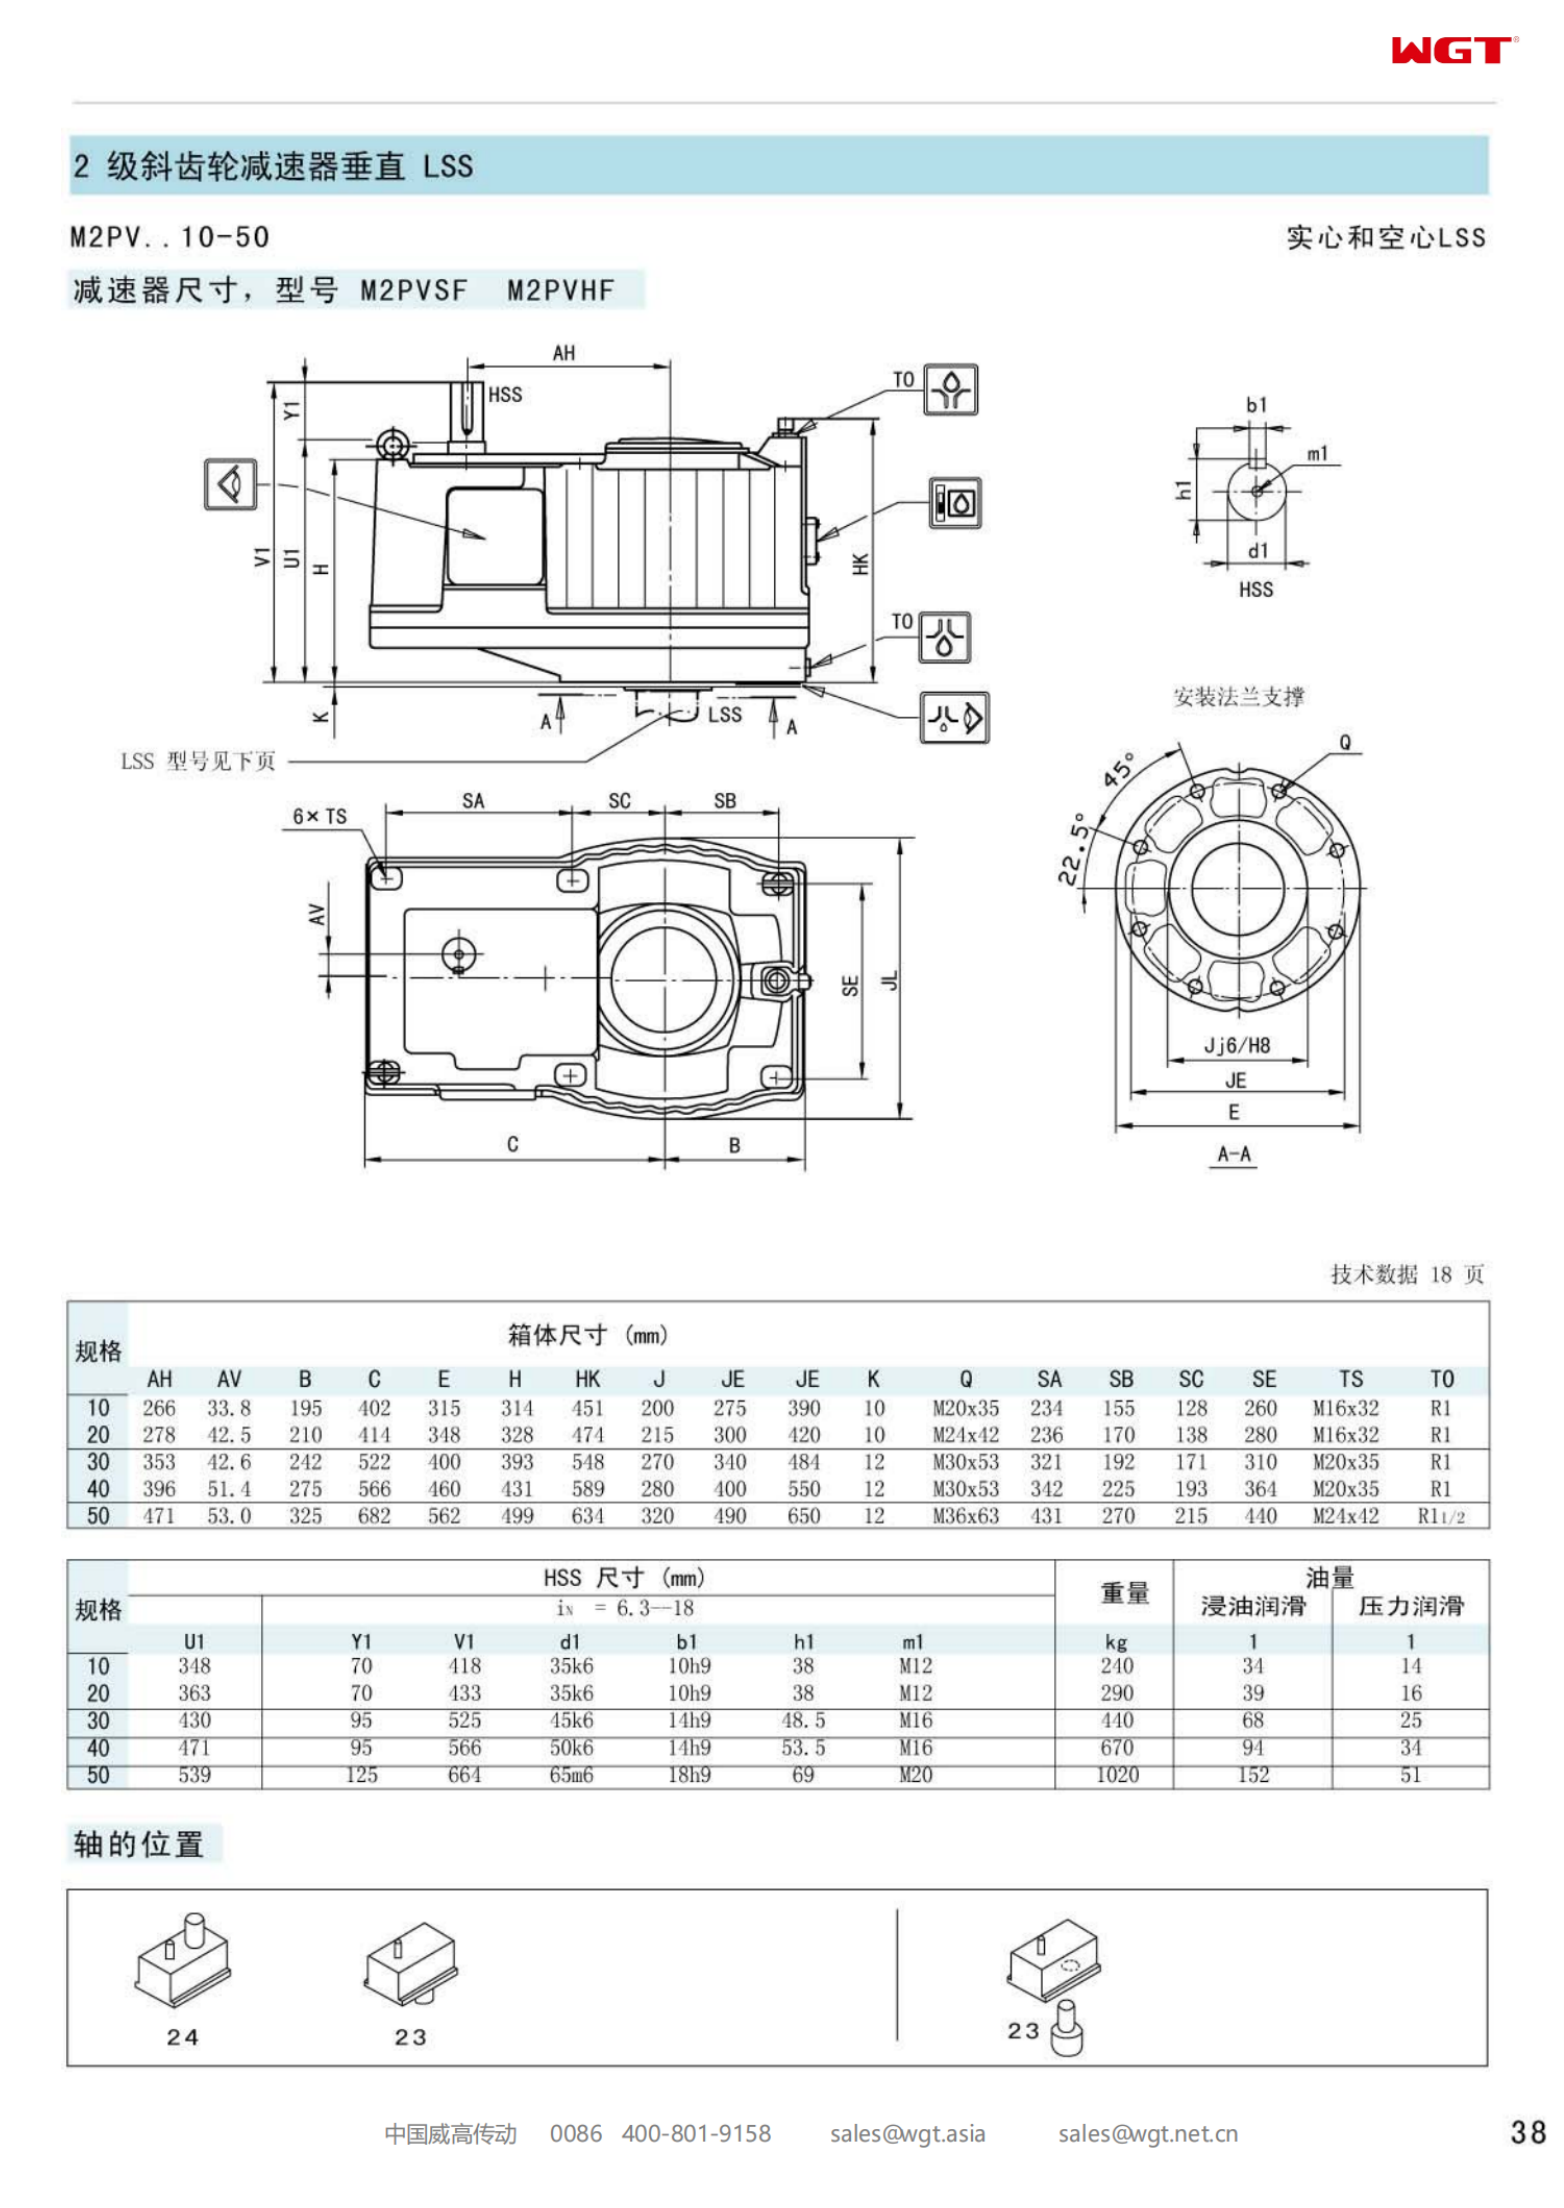 M2PVSF40 Replace_SEW_M_Series Gearbox